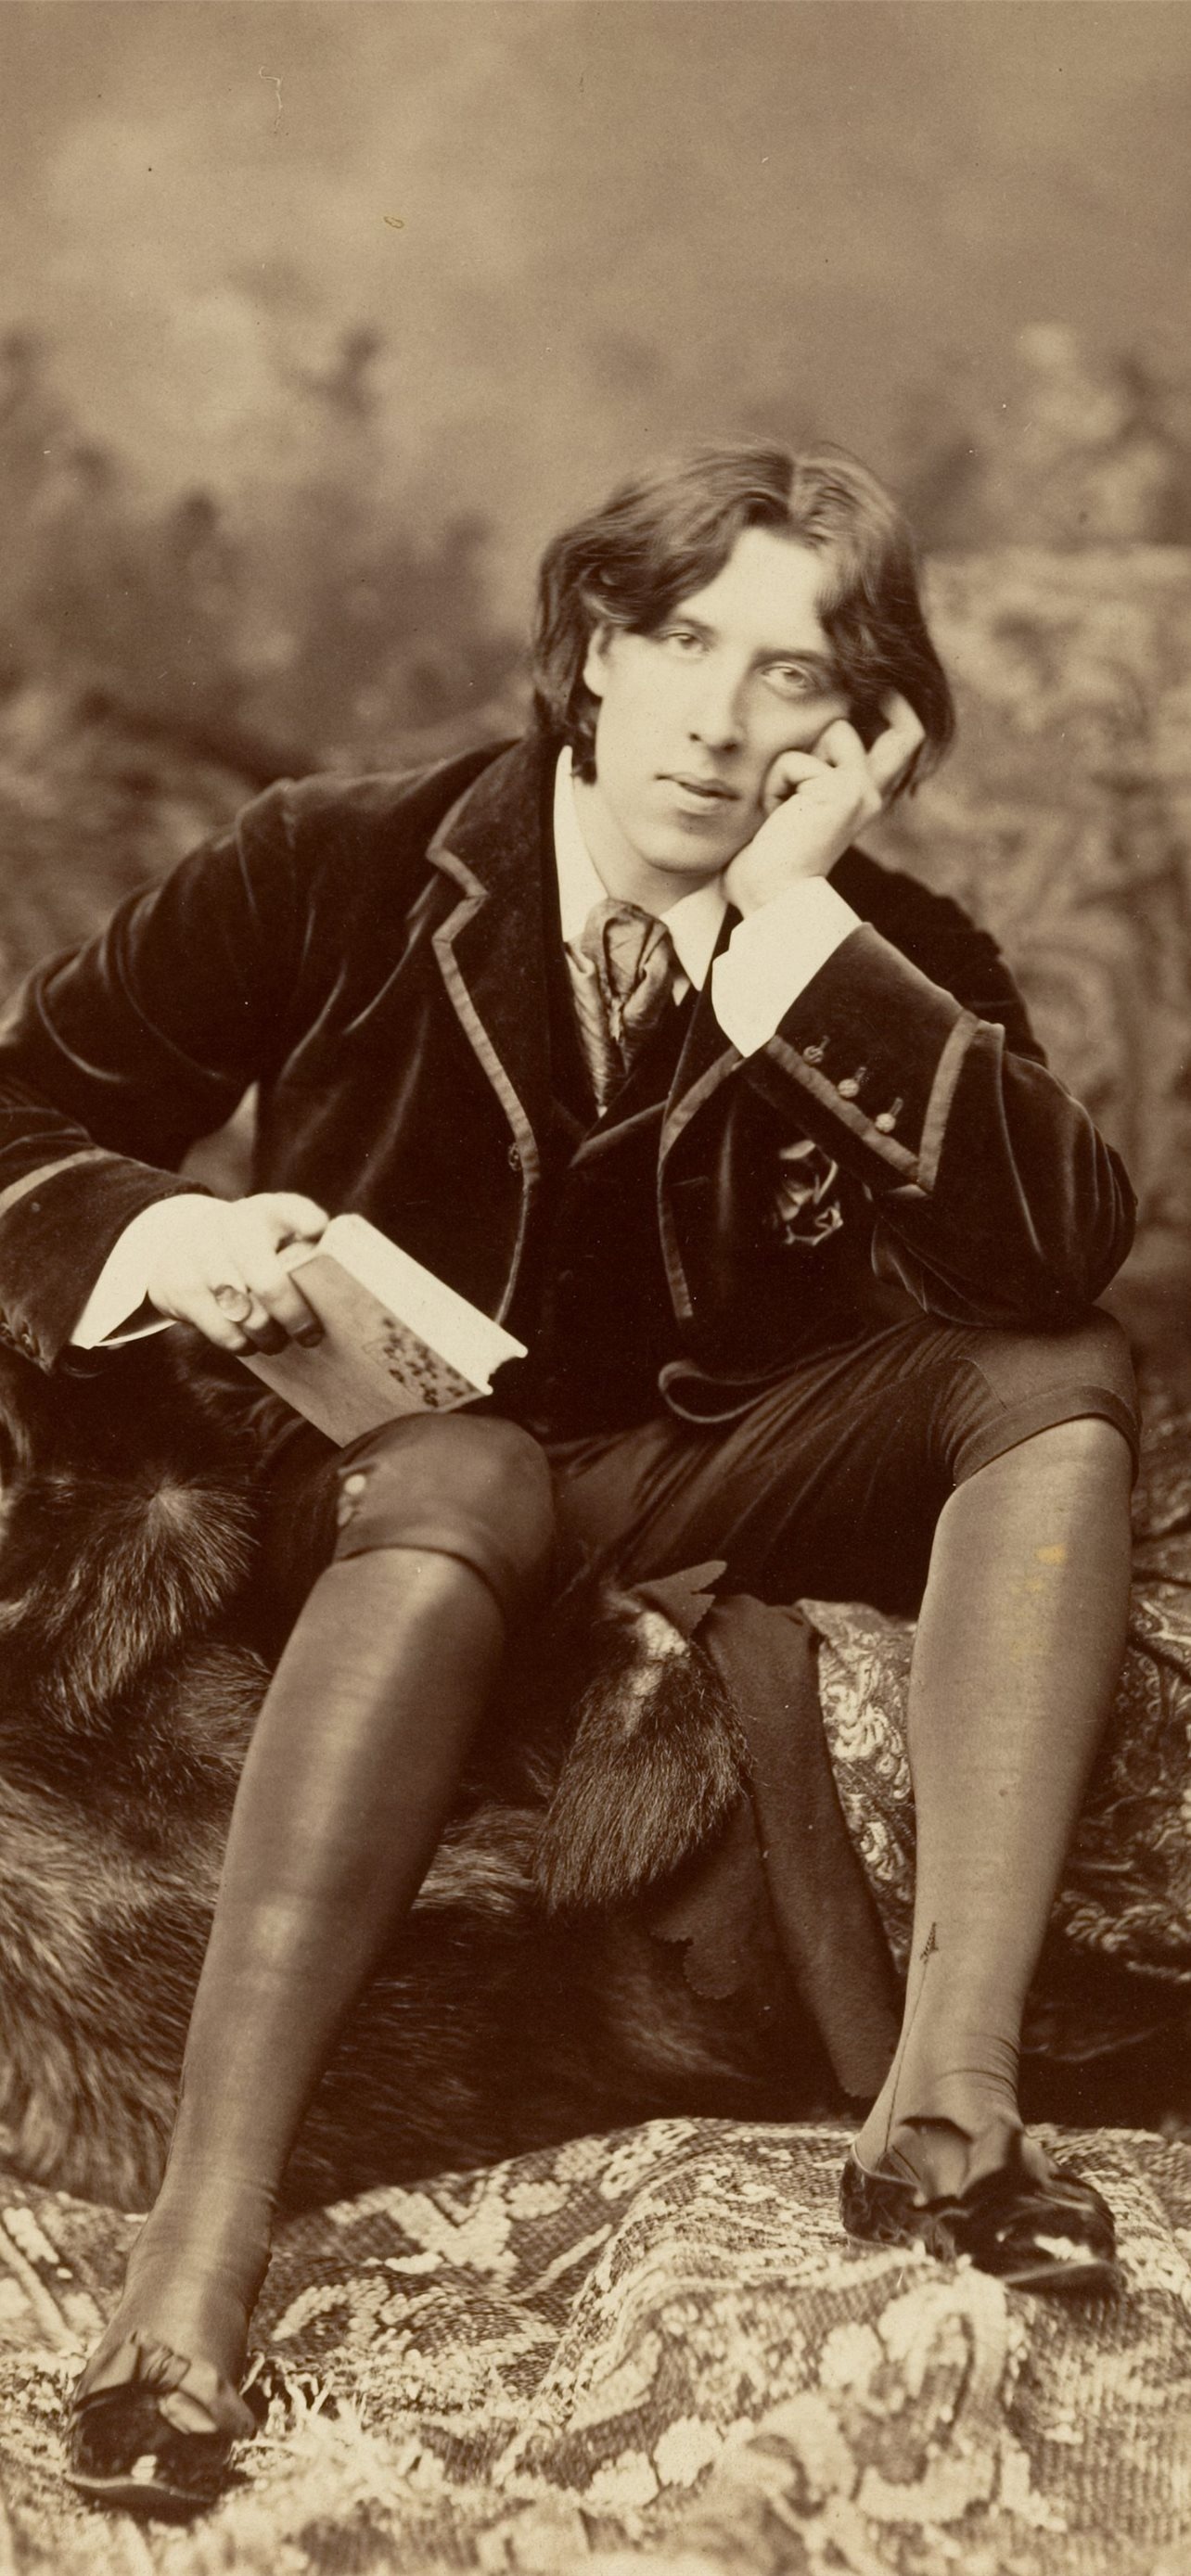 Oscar Wilde, iPhone wallpapers, Free download, Artistic designs, 1290x2780 HD Phone